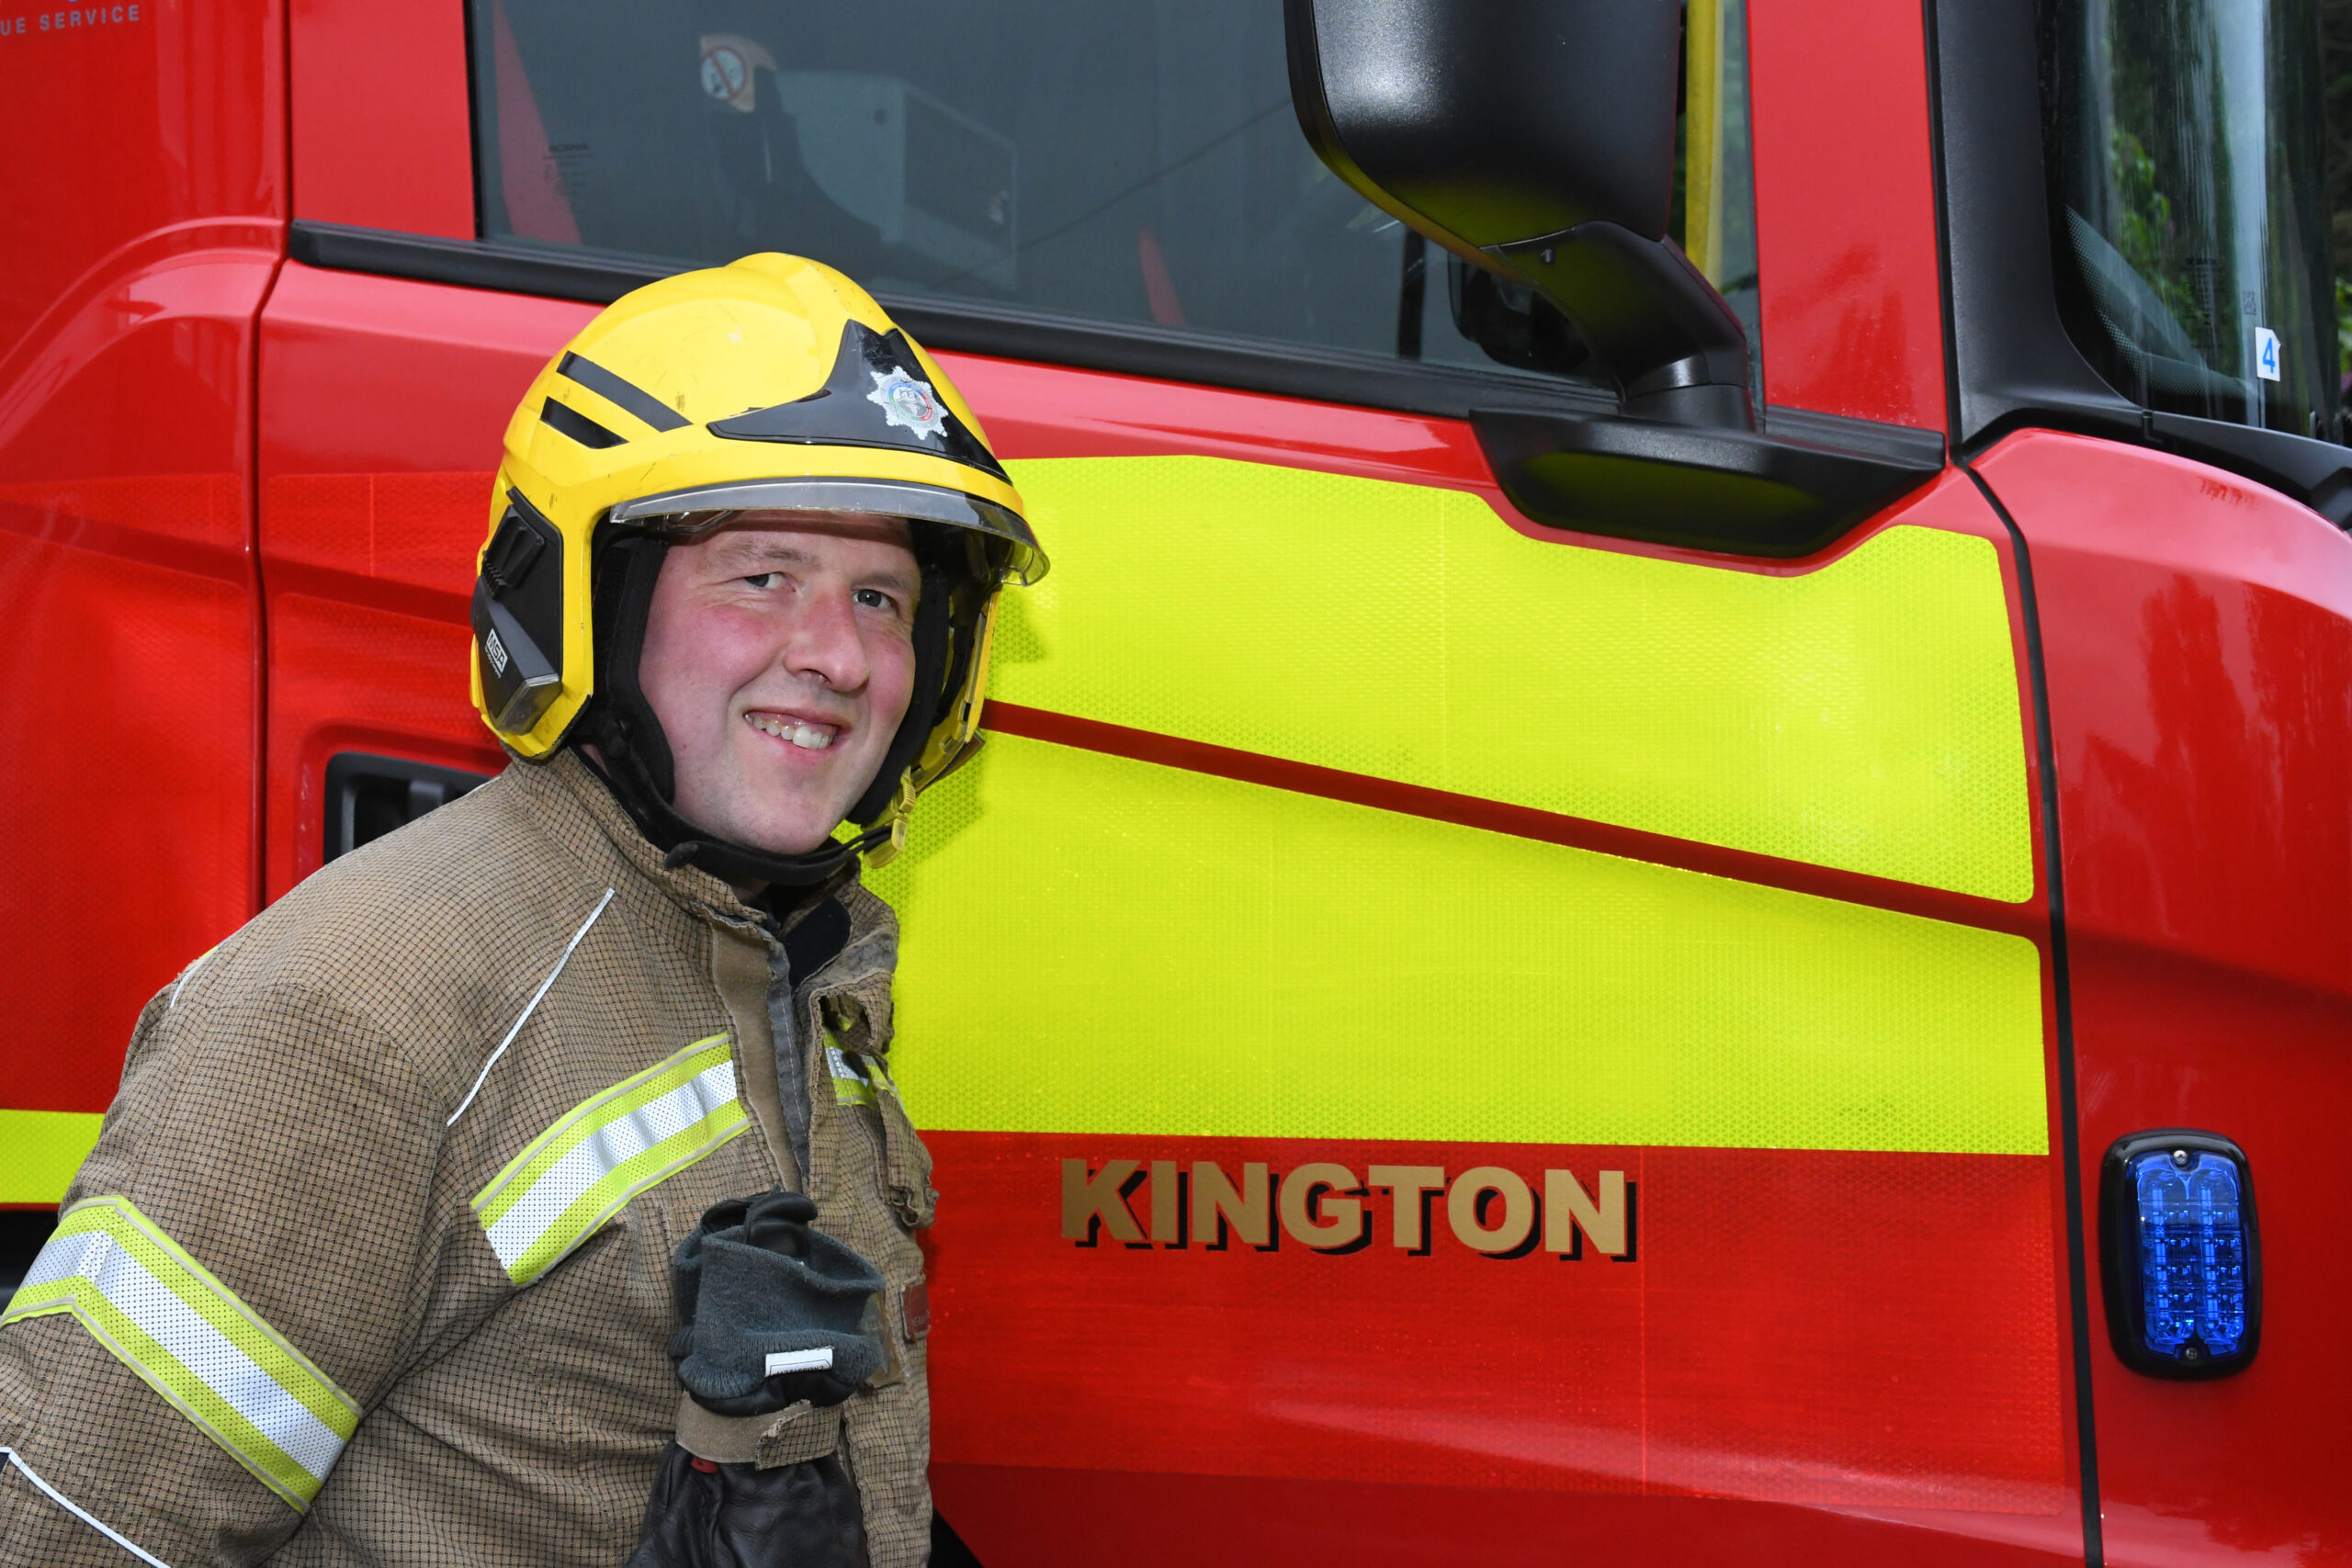 An on call firefighter standing in front of fire engine smiling